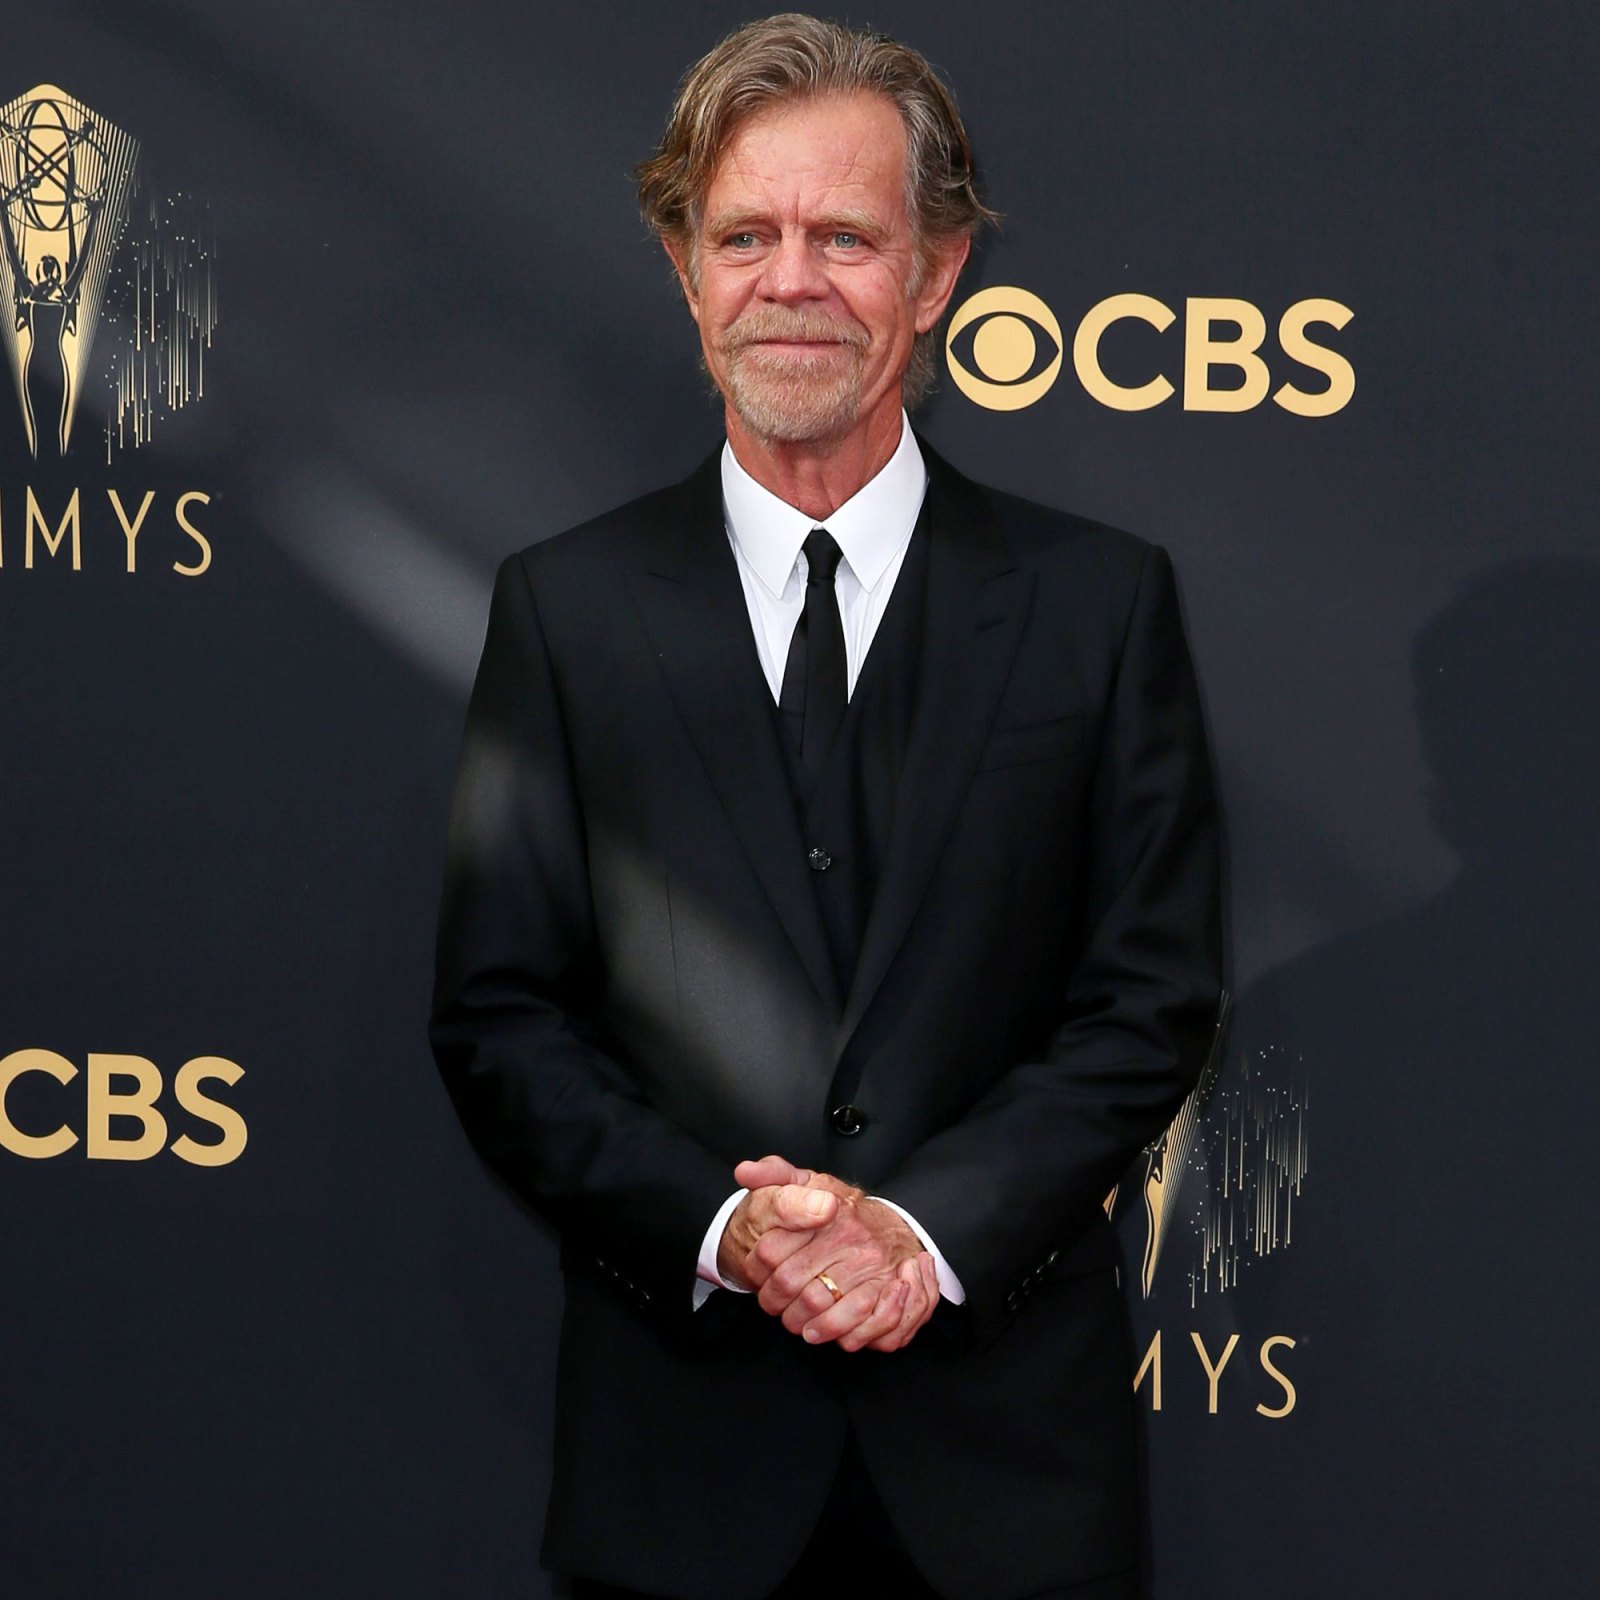 Felicity Huffman and William H. Macy: A Timeline of Their Relationship